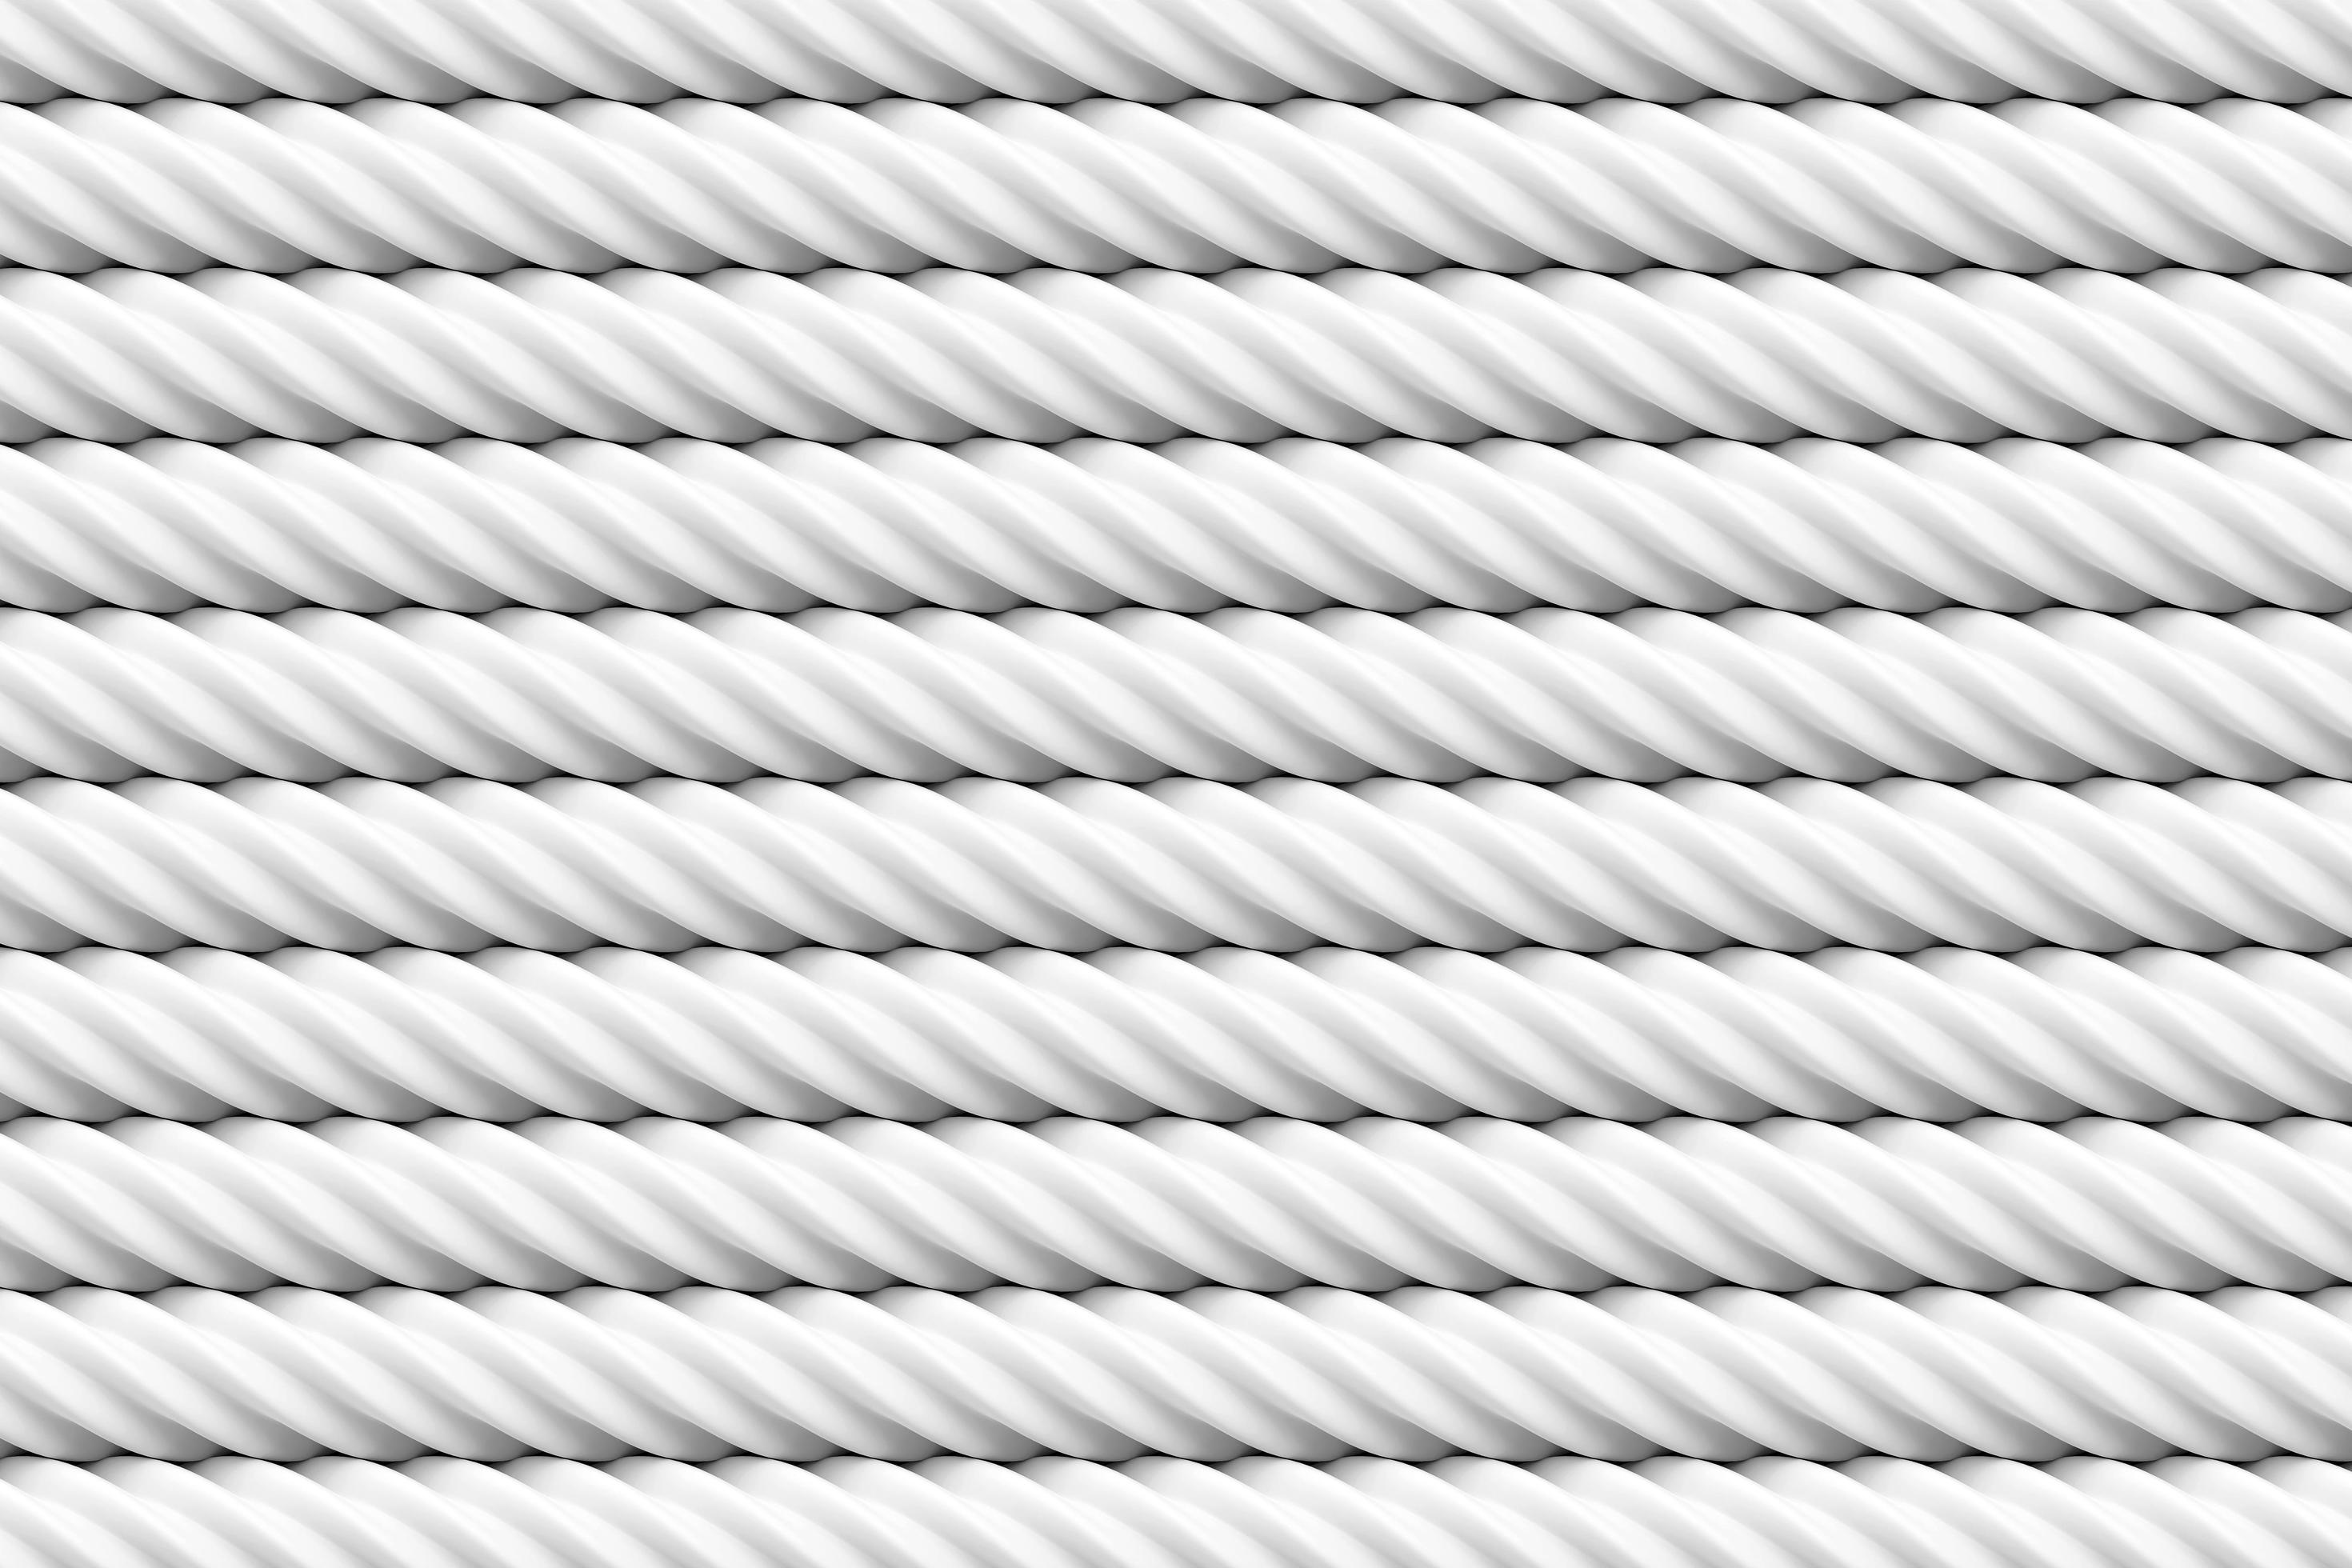 White rope stacking in horizontal pattern background, abstract